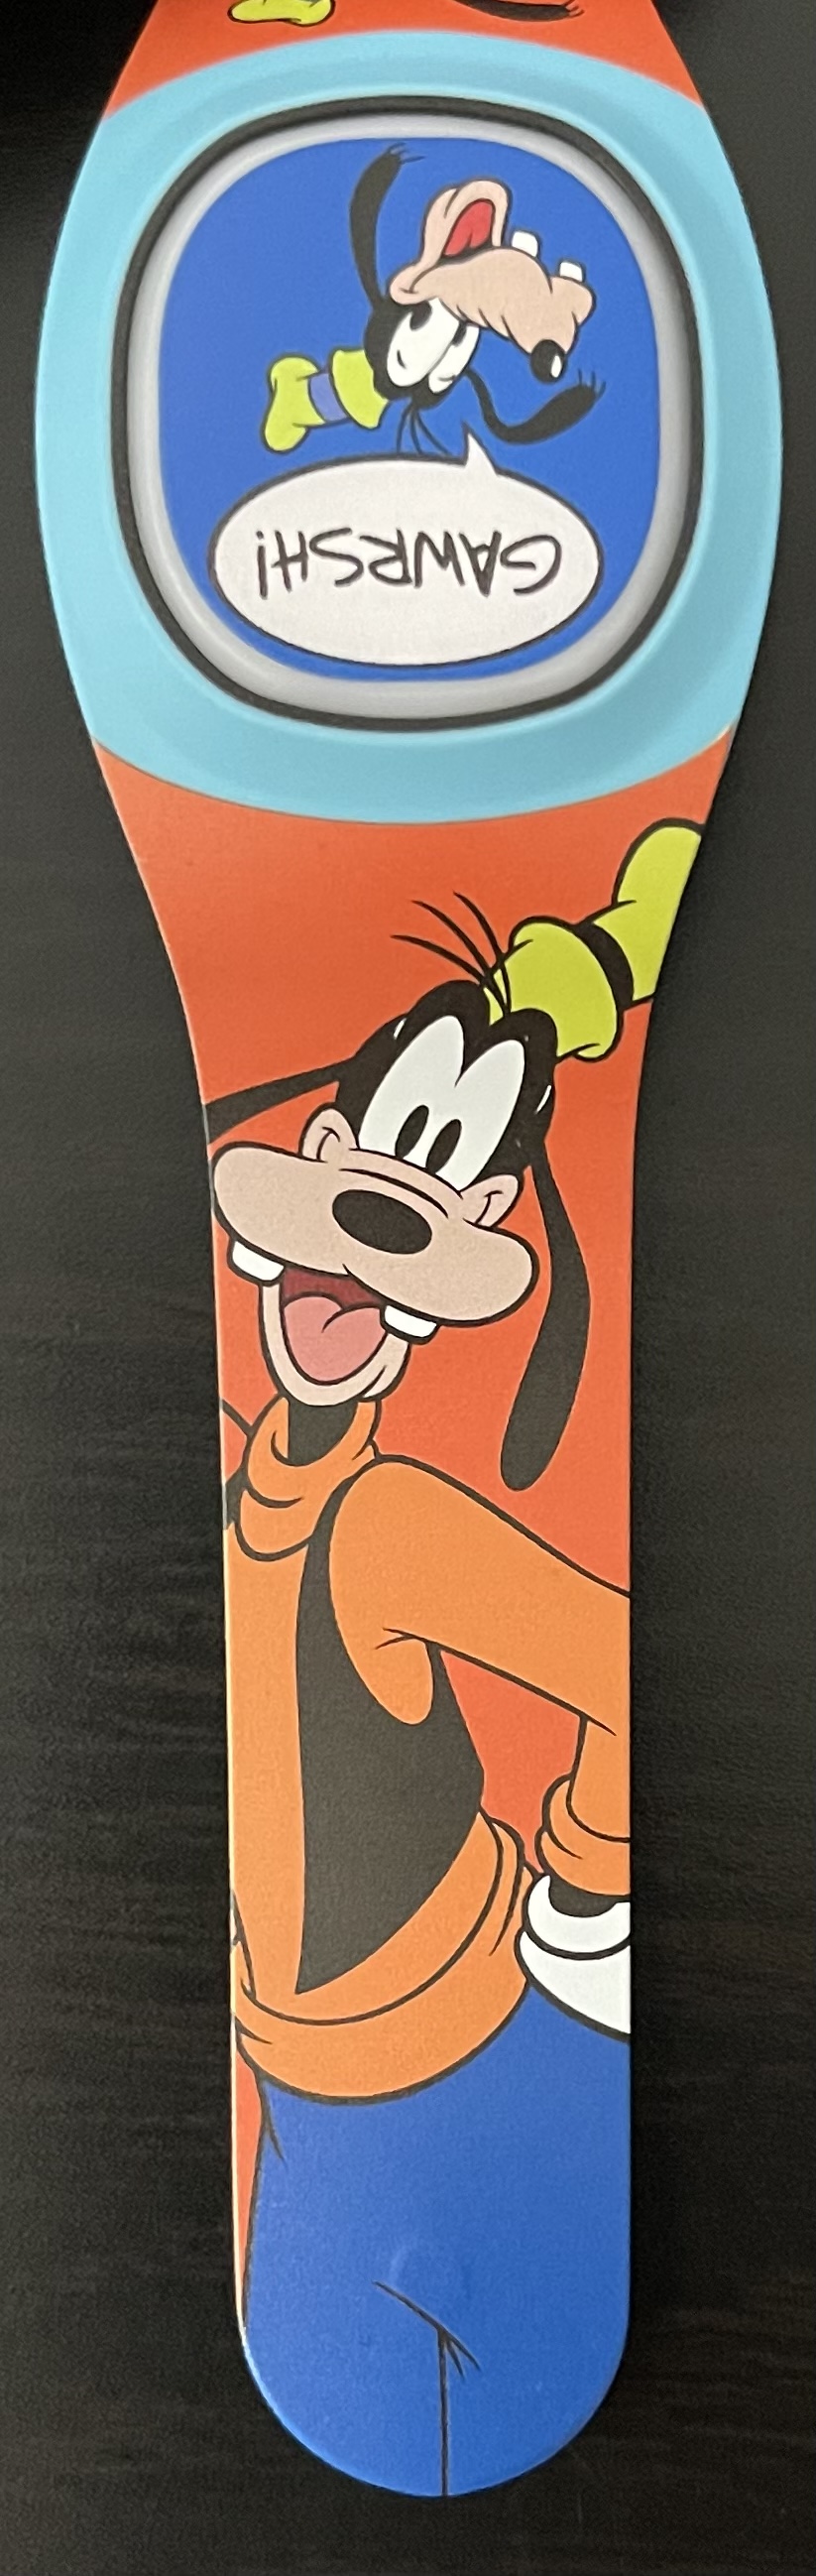 A new Goofy Limited Release MagicBand was released today